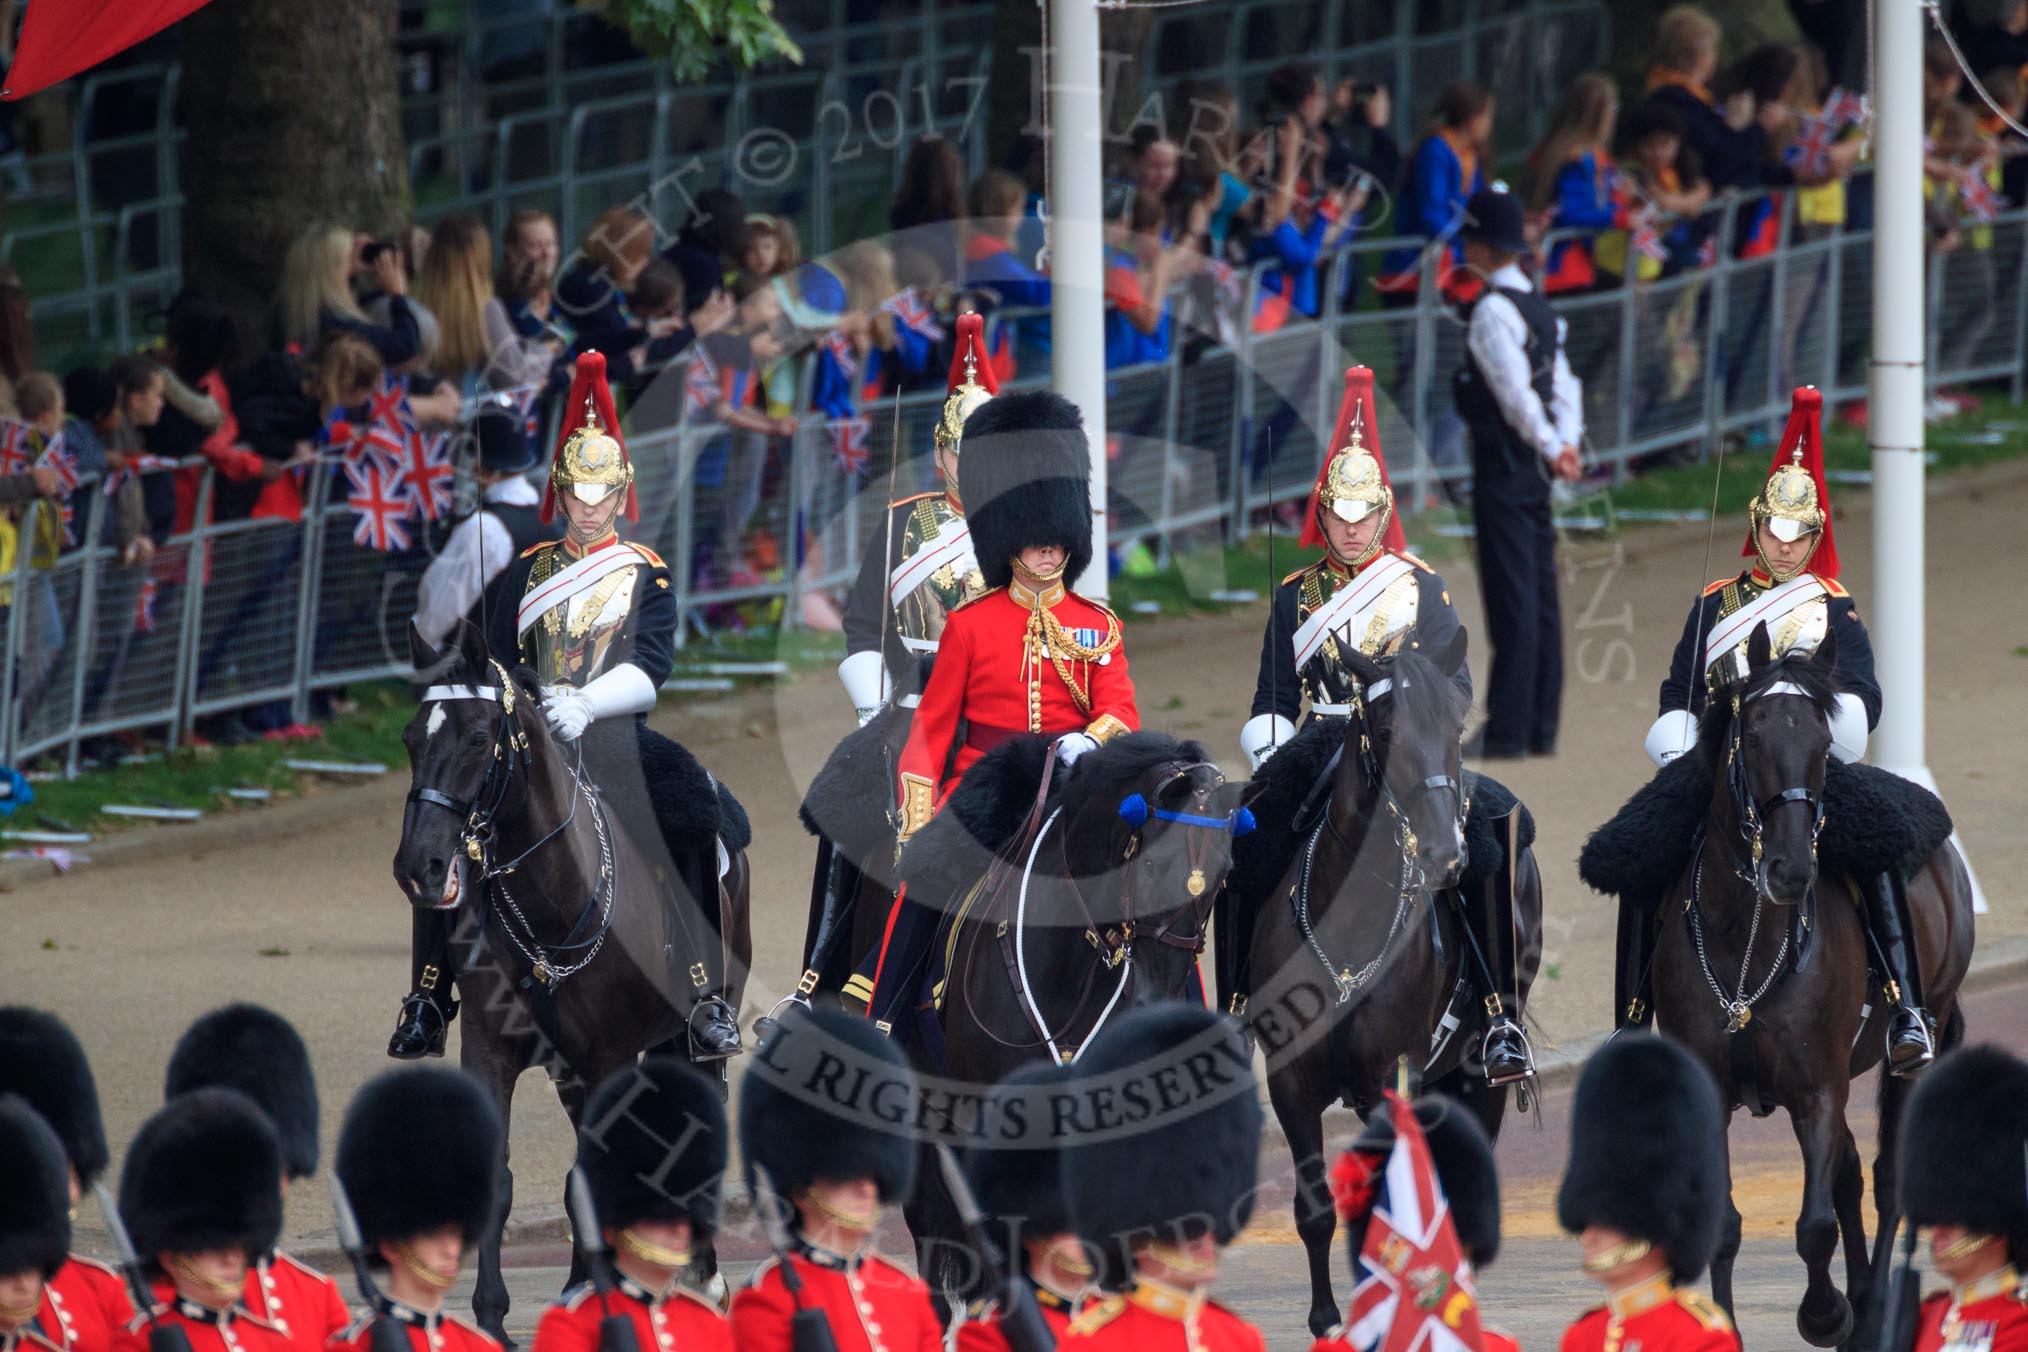 during The Colonel's Review {iptcyear4} (final rehearsal for Trooping the Colour, The Queen's Birthday Parade)  at Horse Guards Parade, Westminster, London, 2 June 2018, 10:56.